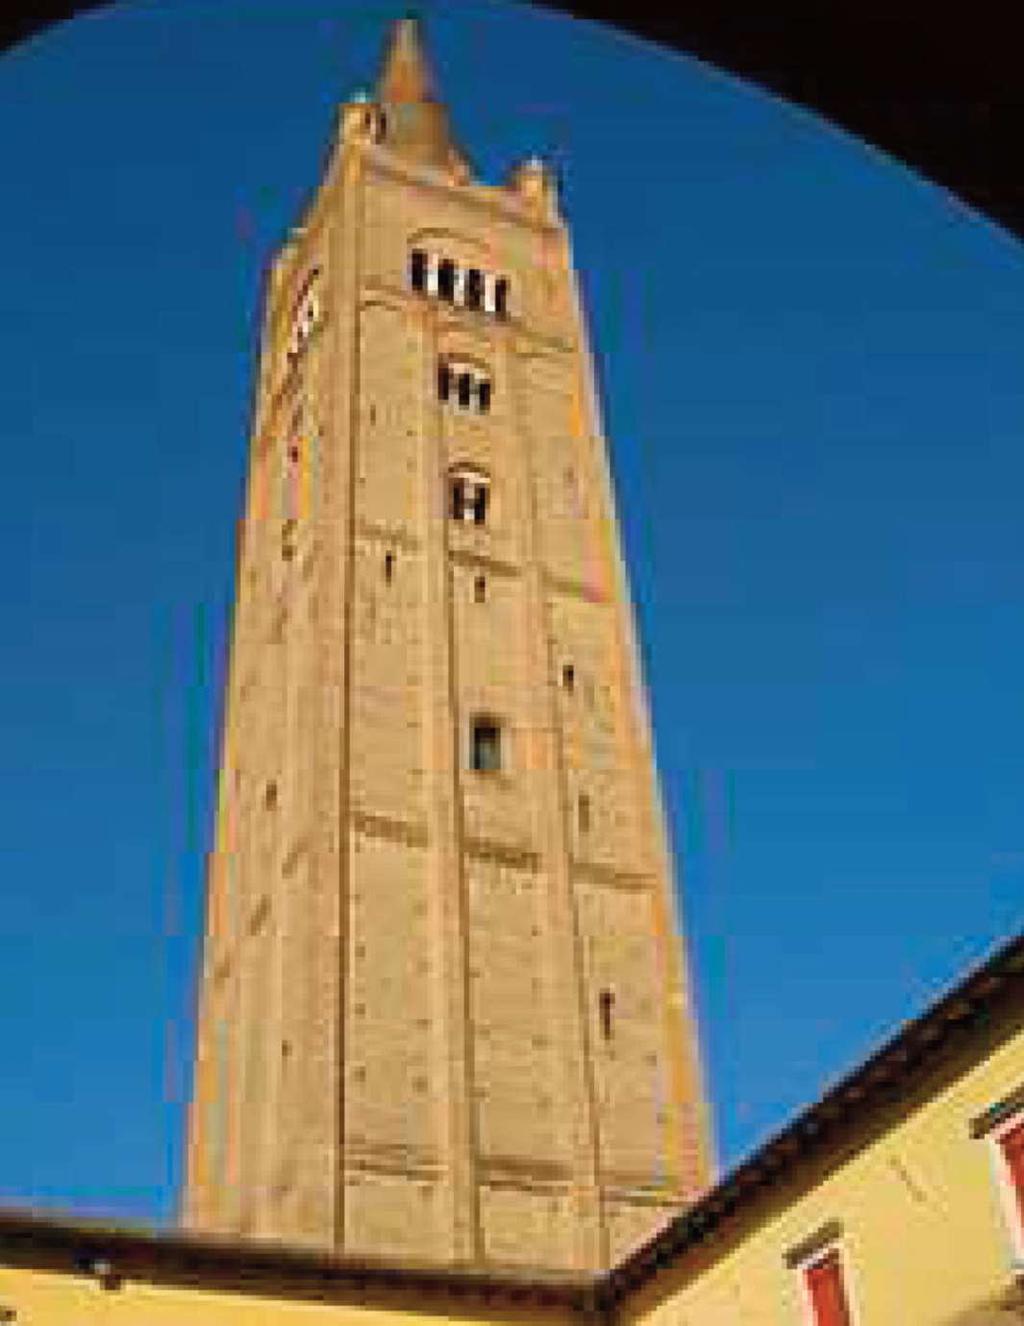 Forlì is also the linguistic centre of the distinctive Romagnolo dialect.